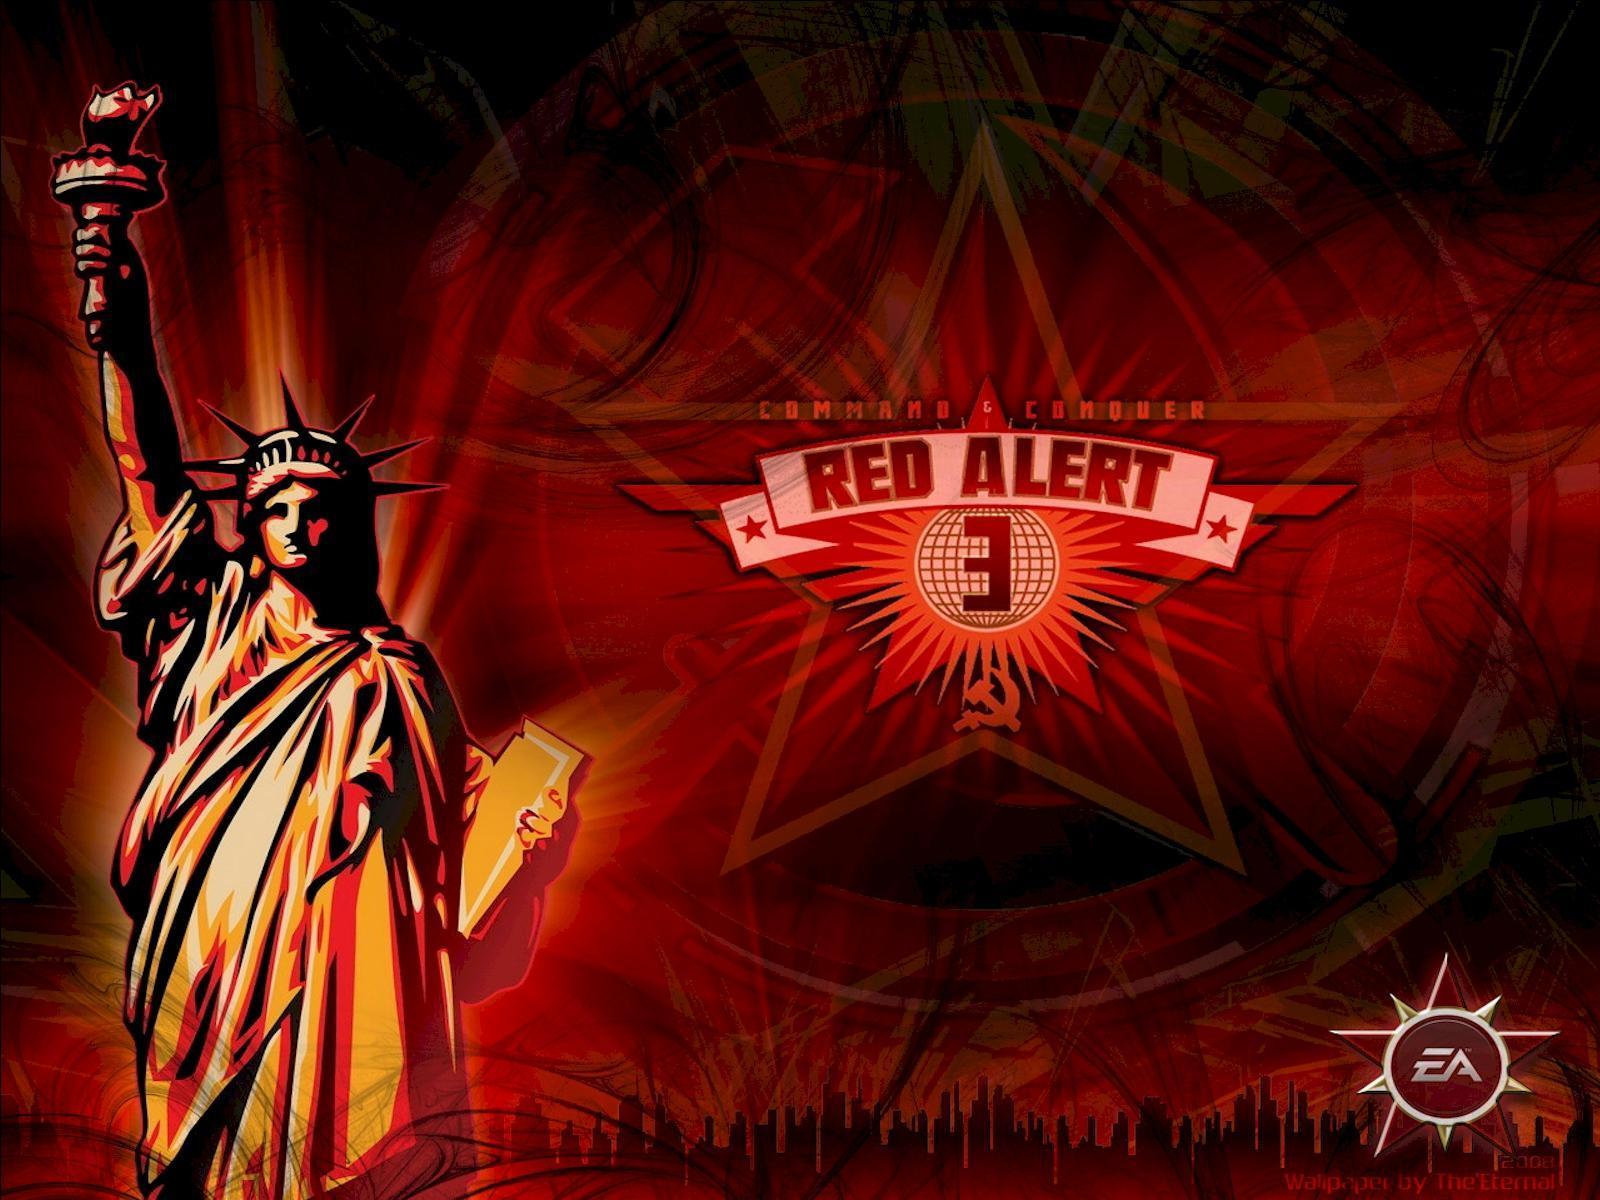 Command & Conquer Red Alert 3 wallpaper picture download